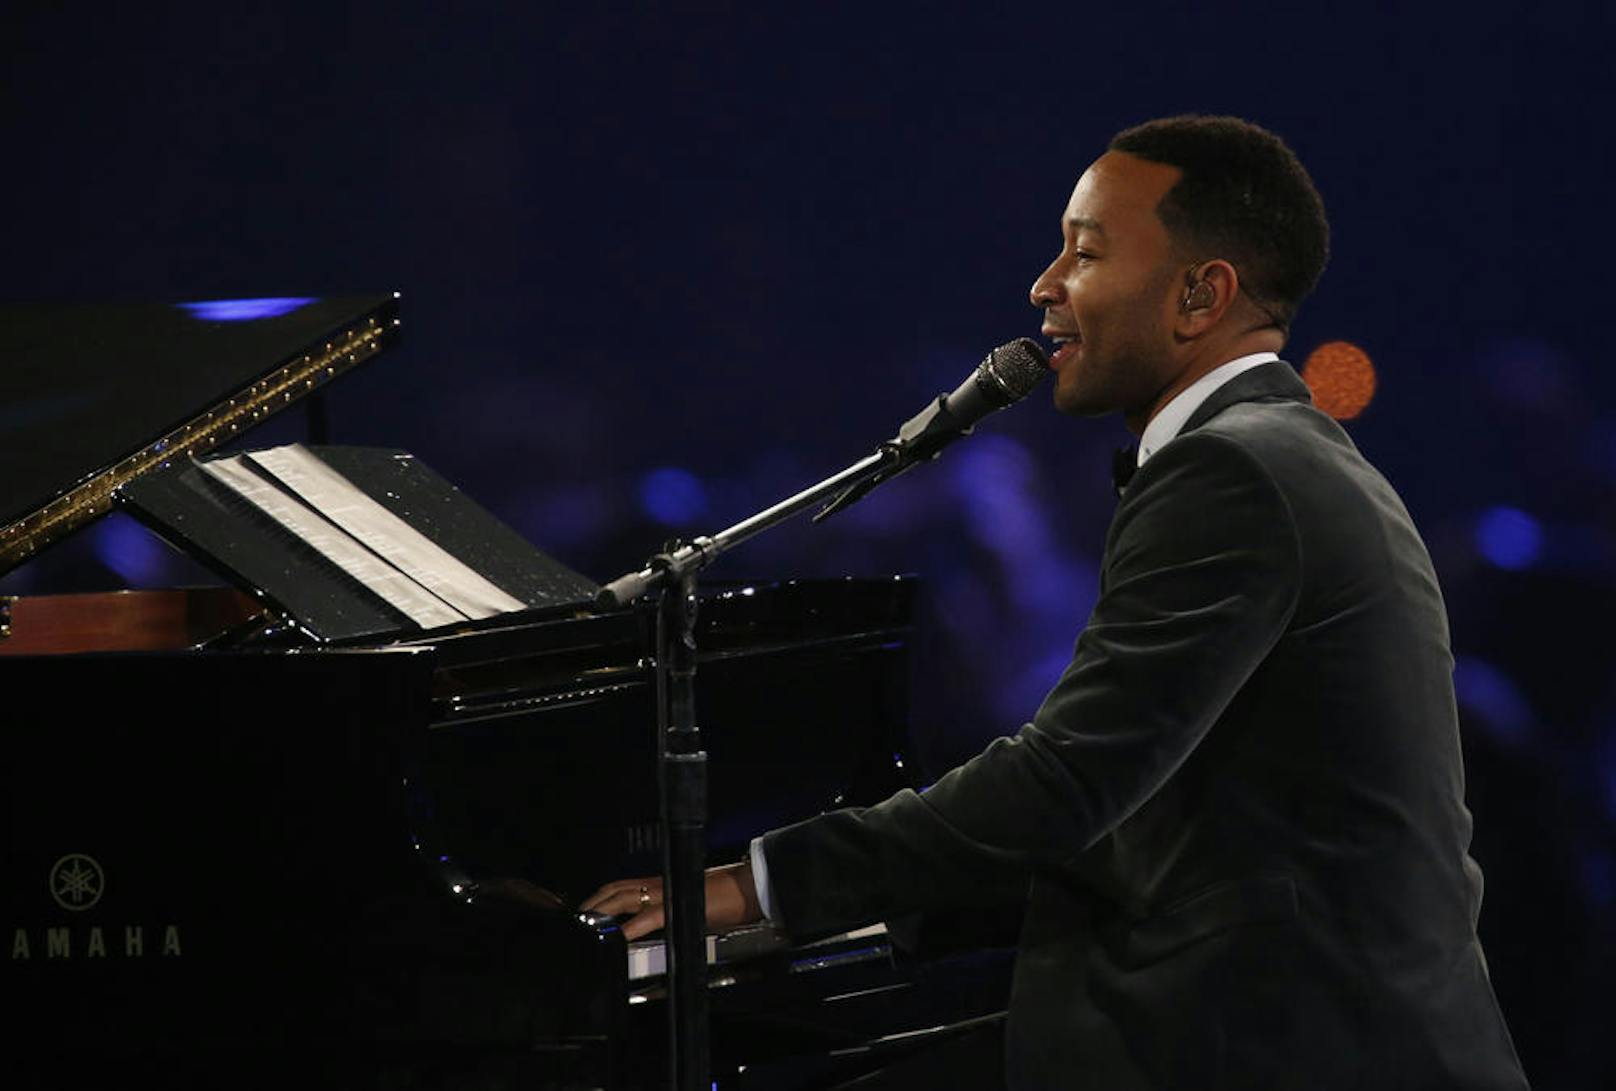 John Legend performt bei der "MusiCares Person of the Year Gala" in Los Angeles (13. Februar 2016).